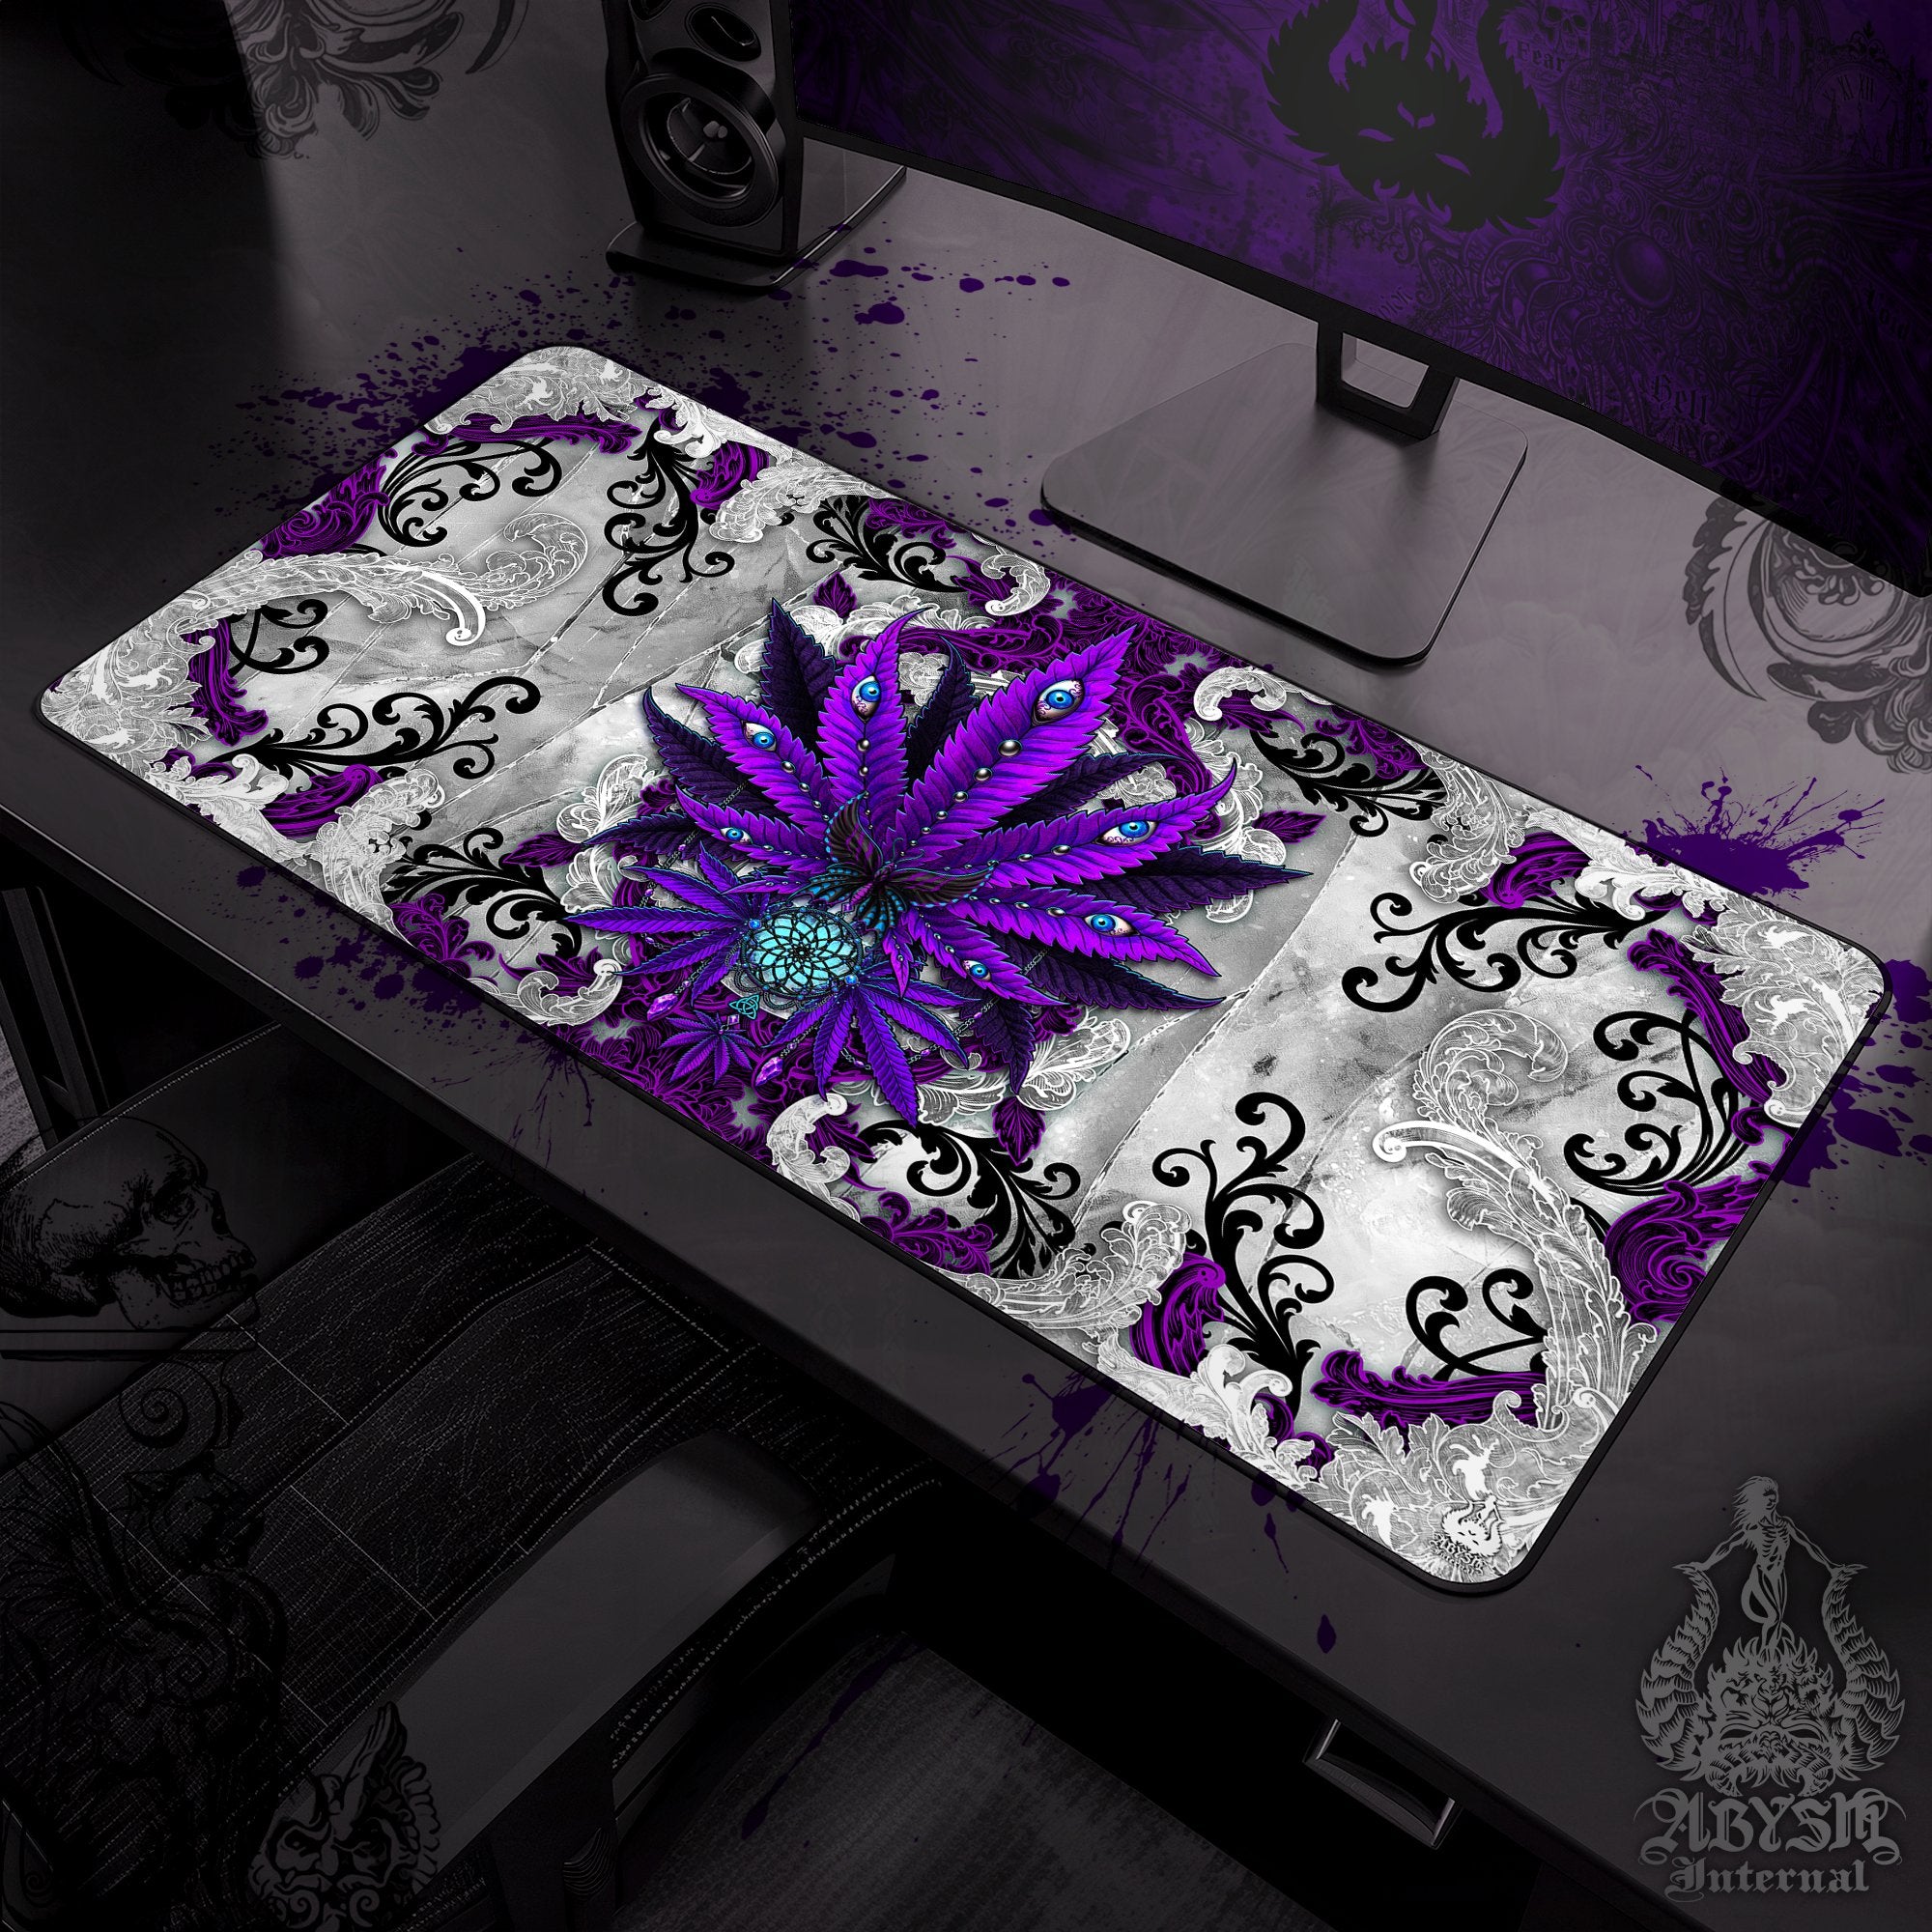 Weed Workpad, Cannabis Desk Mat, White Goth Gaming Mouse Pad, Purple Marijuana Table Protector Cover, 420 Art Print - Abysm Internal